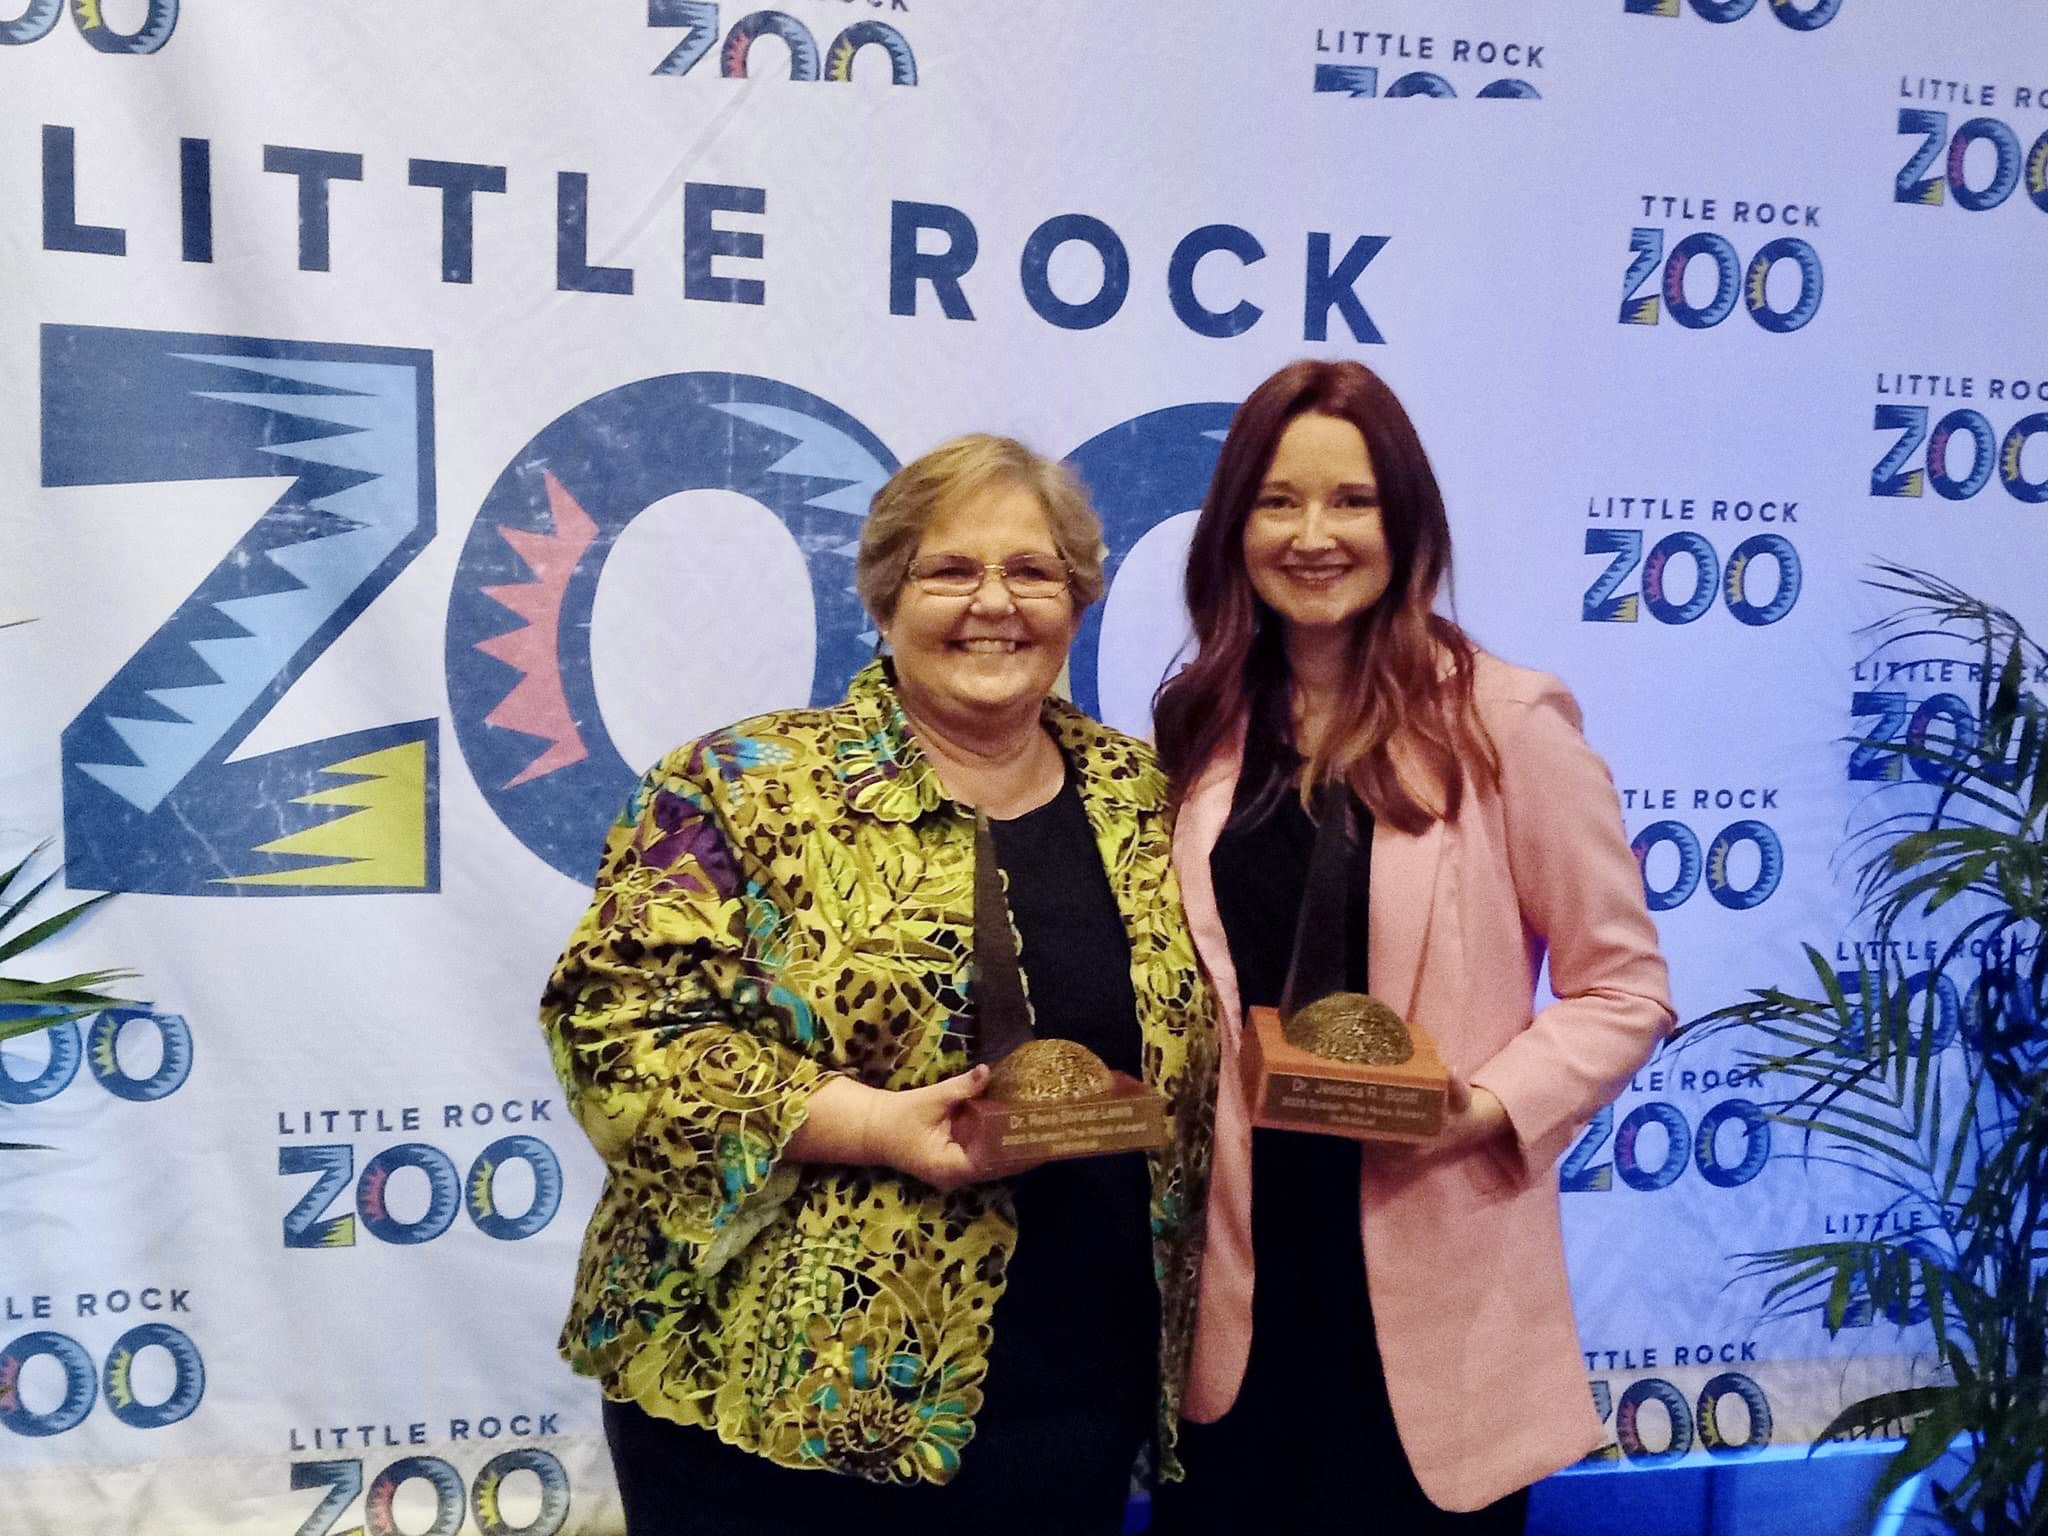 Dr. Jessica Scott, associate director of the Donaghey Scholars Honors Program, and Dr. René Shroat-Lewis, associate professor of geology, both received a Sustain the Rock Award from the Little Rock Sustainability Commission on April 19.